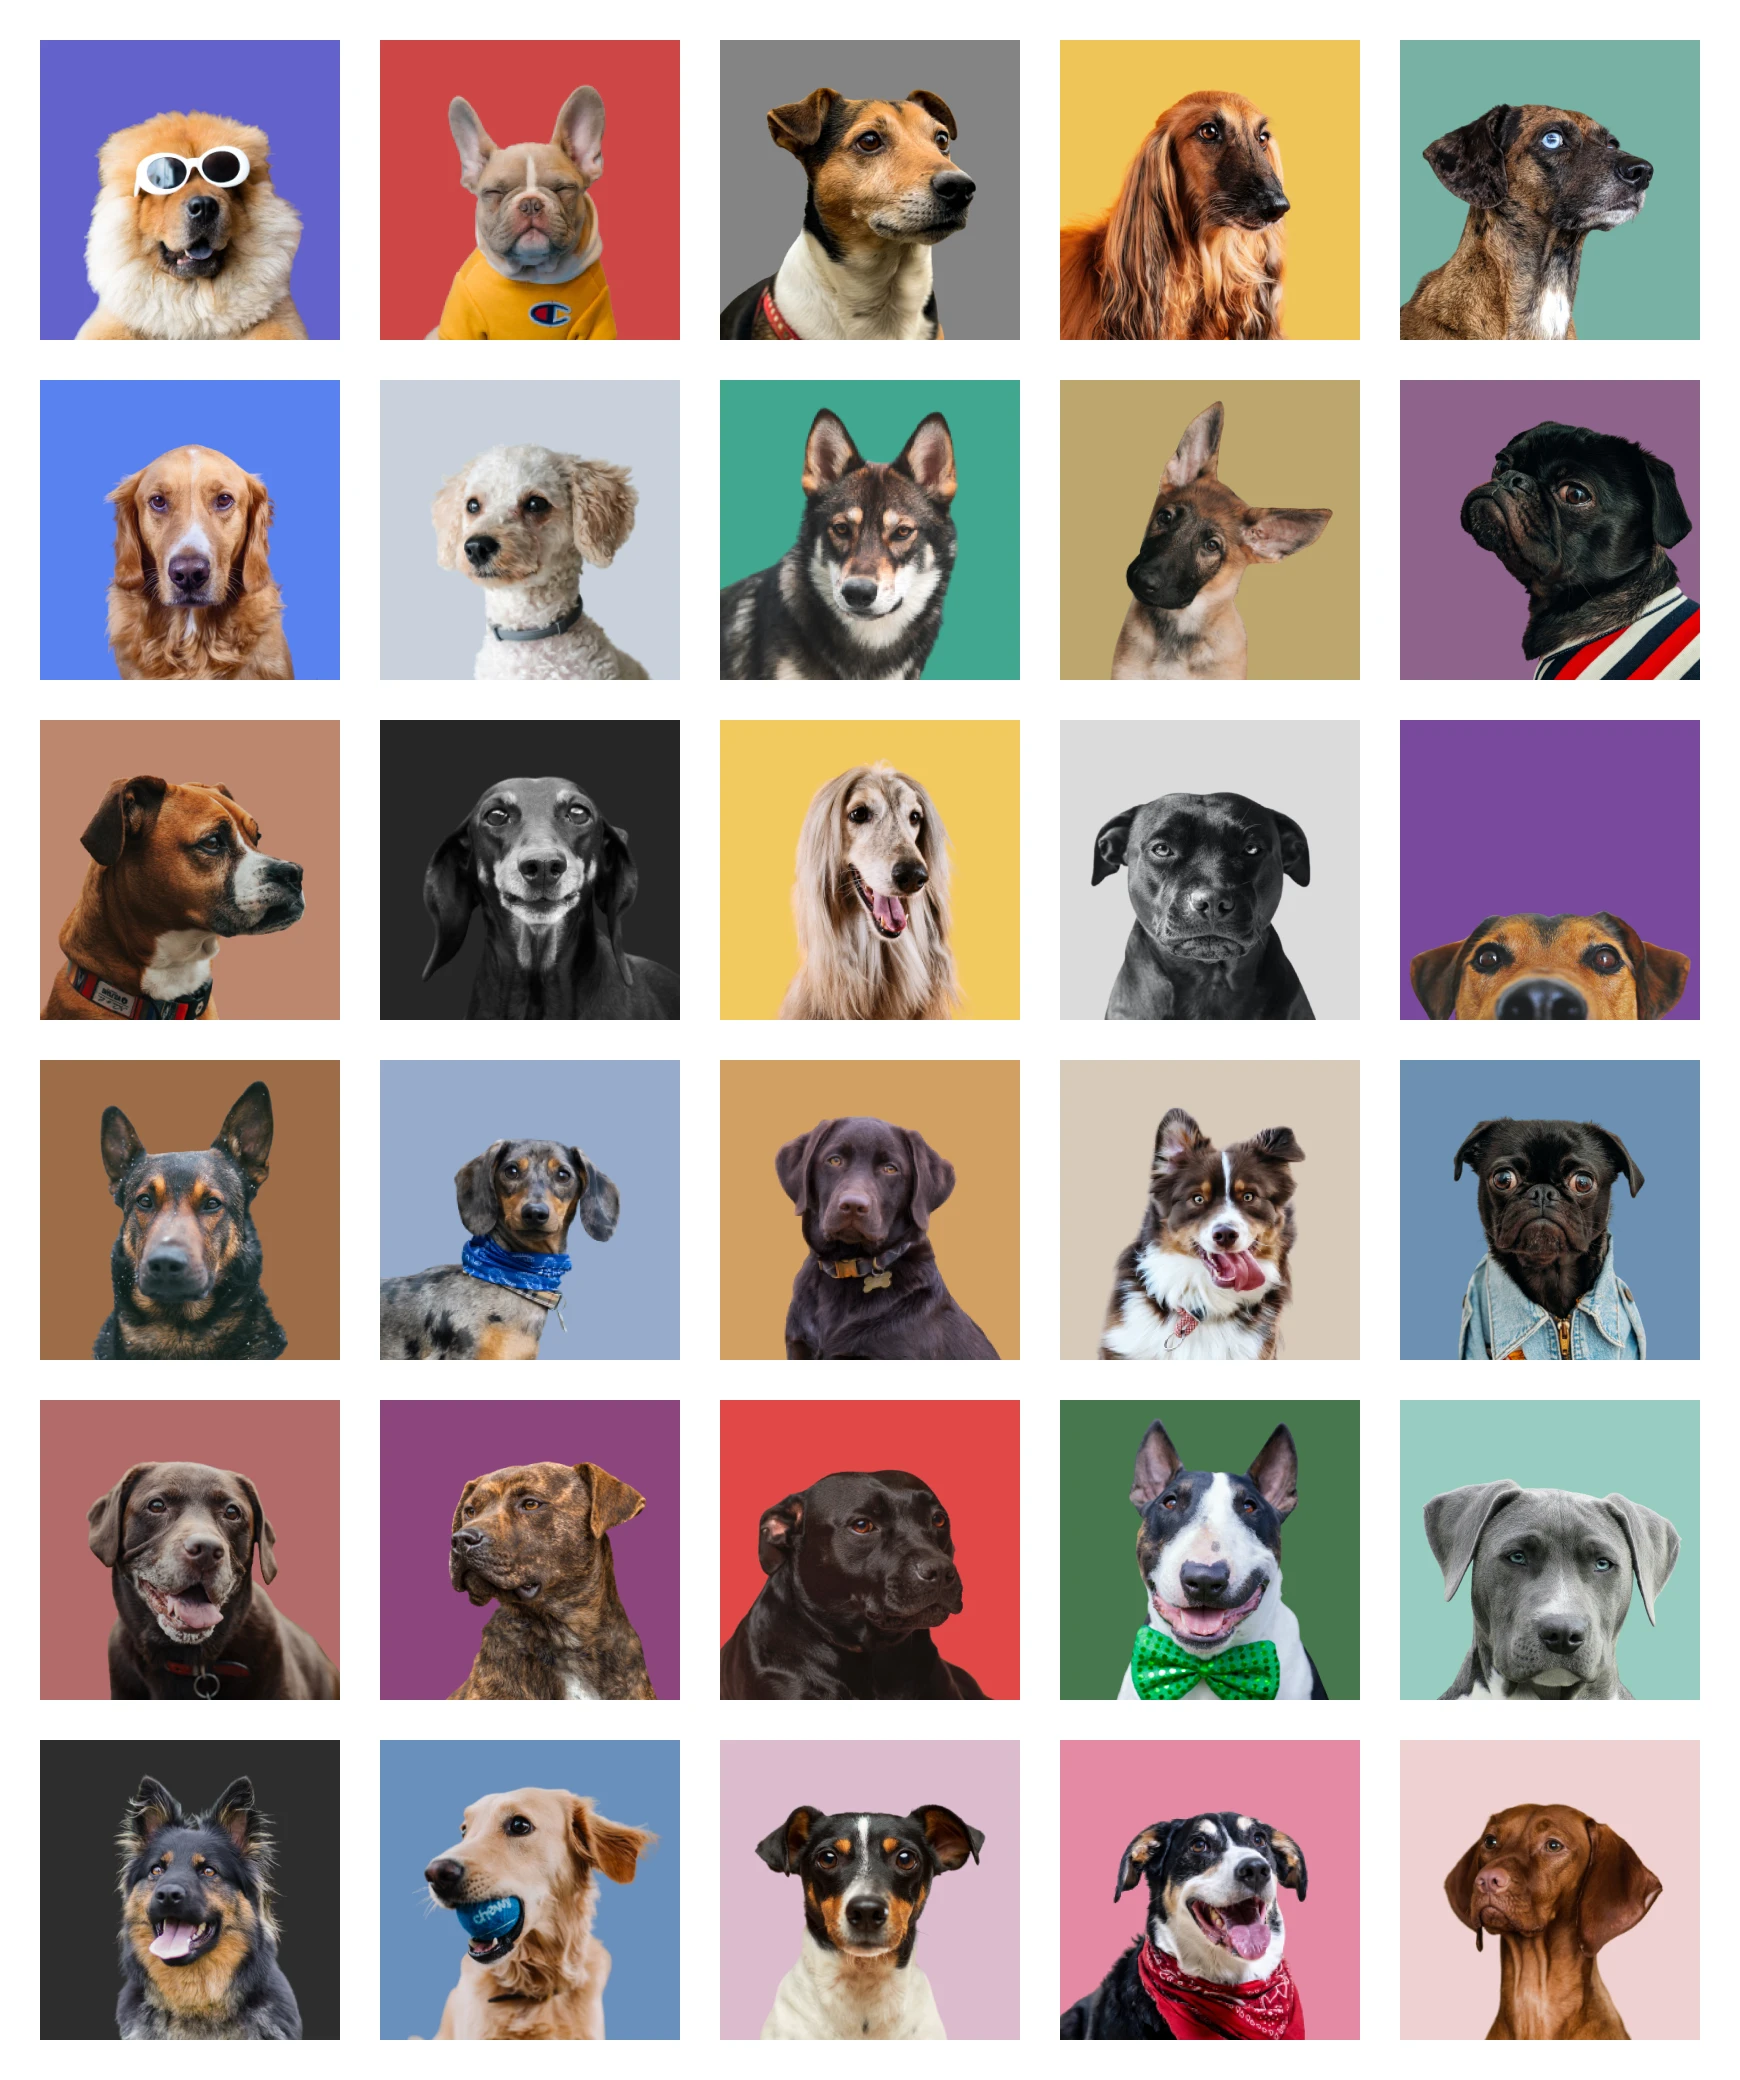 Free Avatars, lol - 60+ Adorable dog, cat and random animal avatars for your designs. Available for sketch, figma and PNGs.